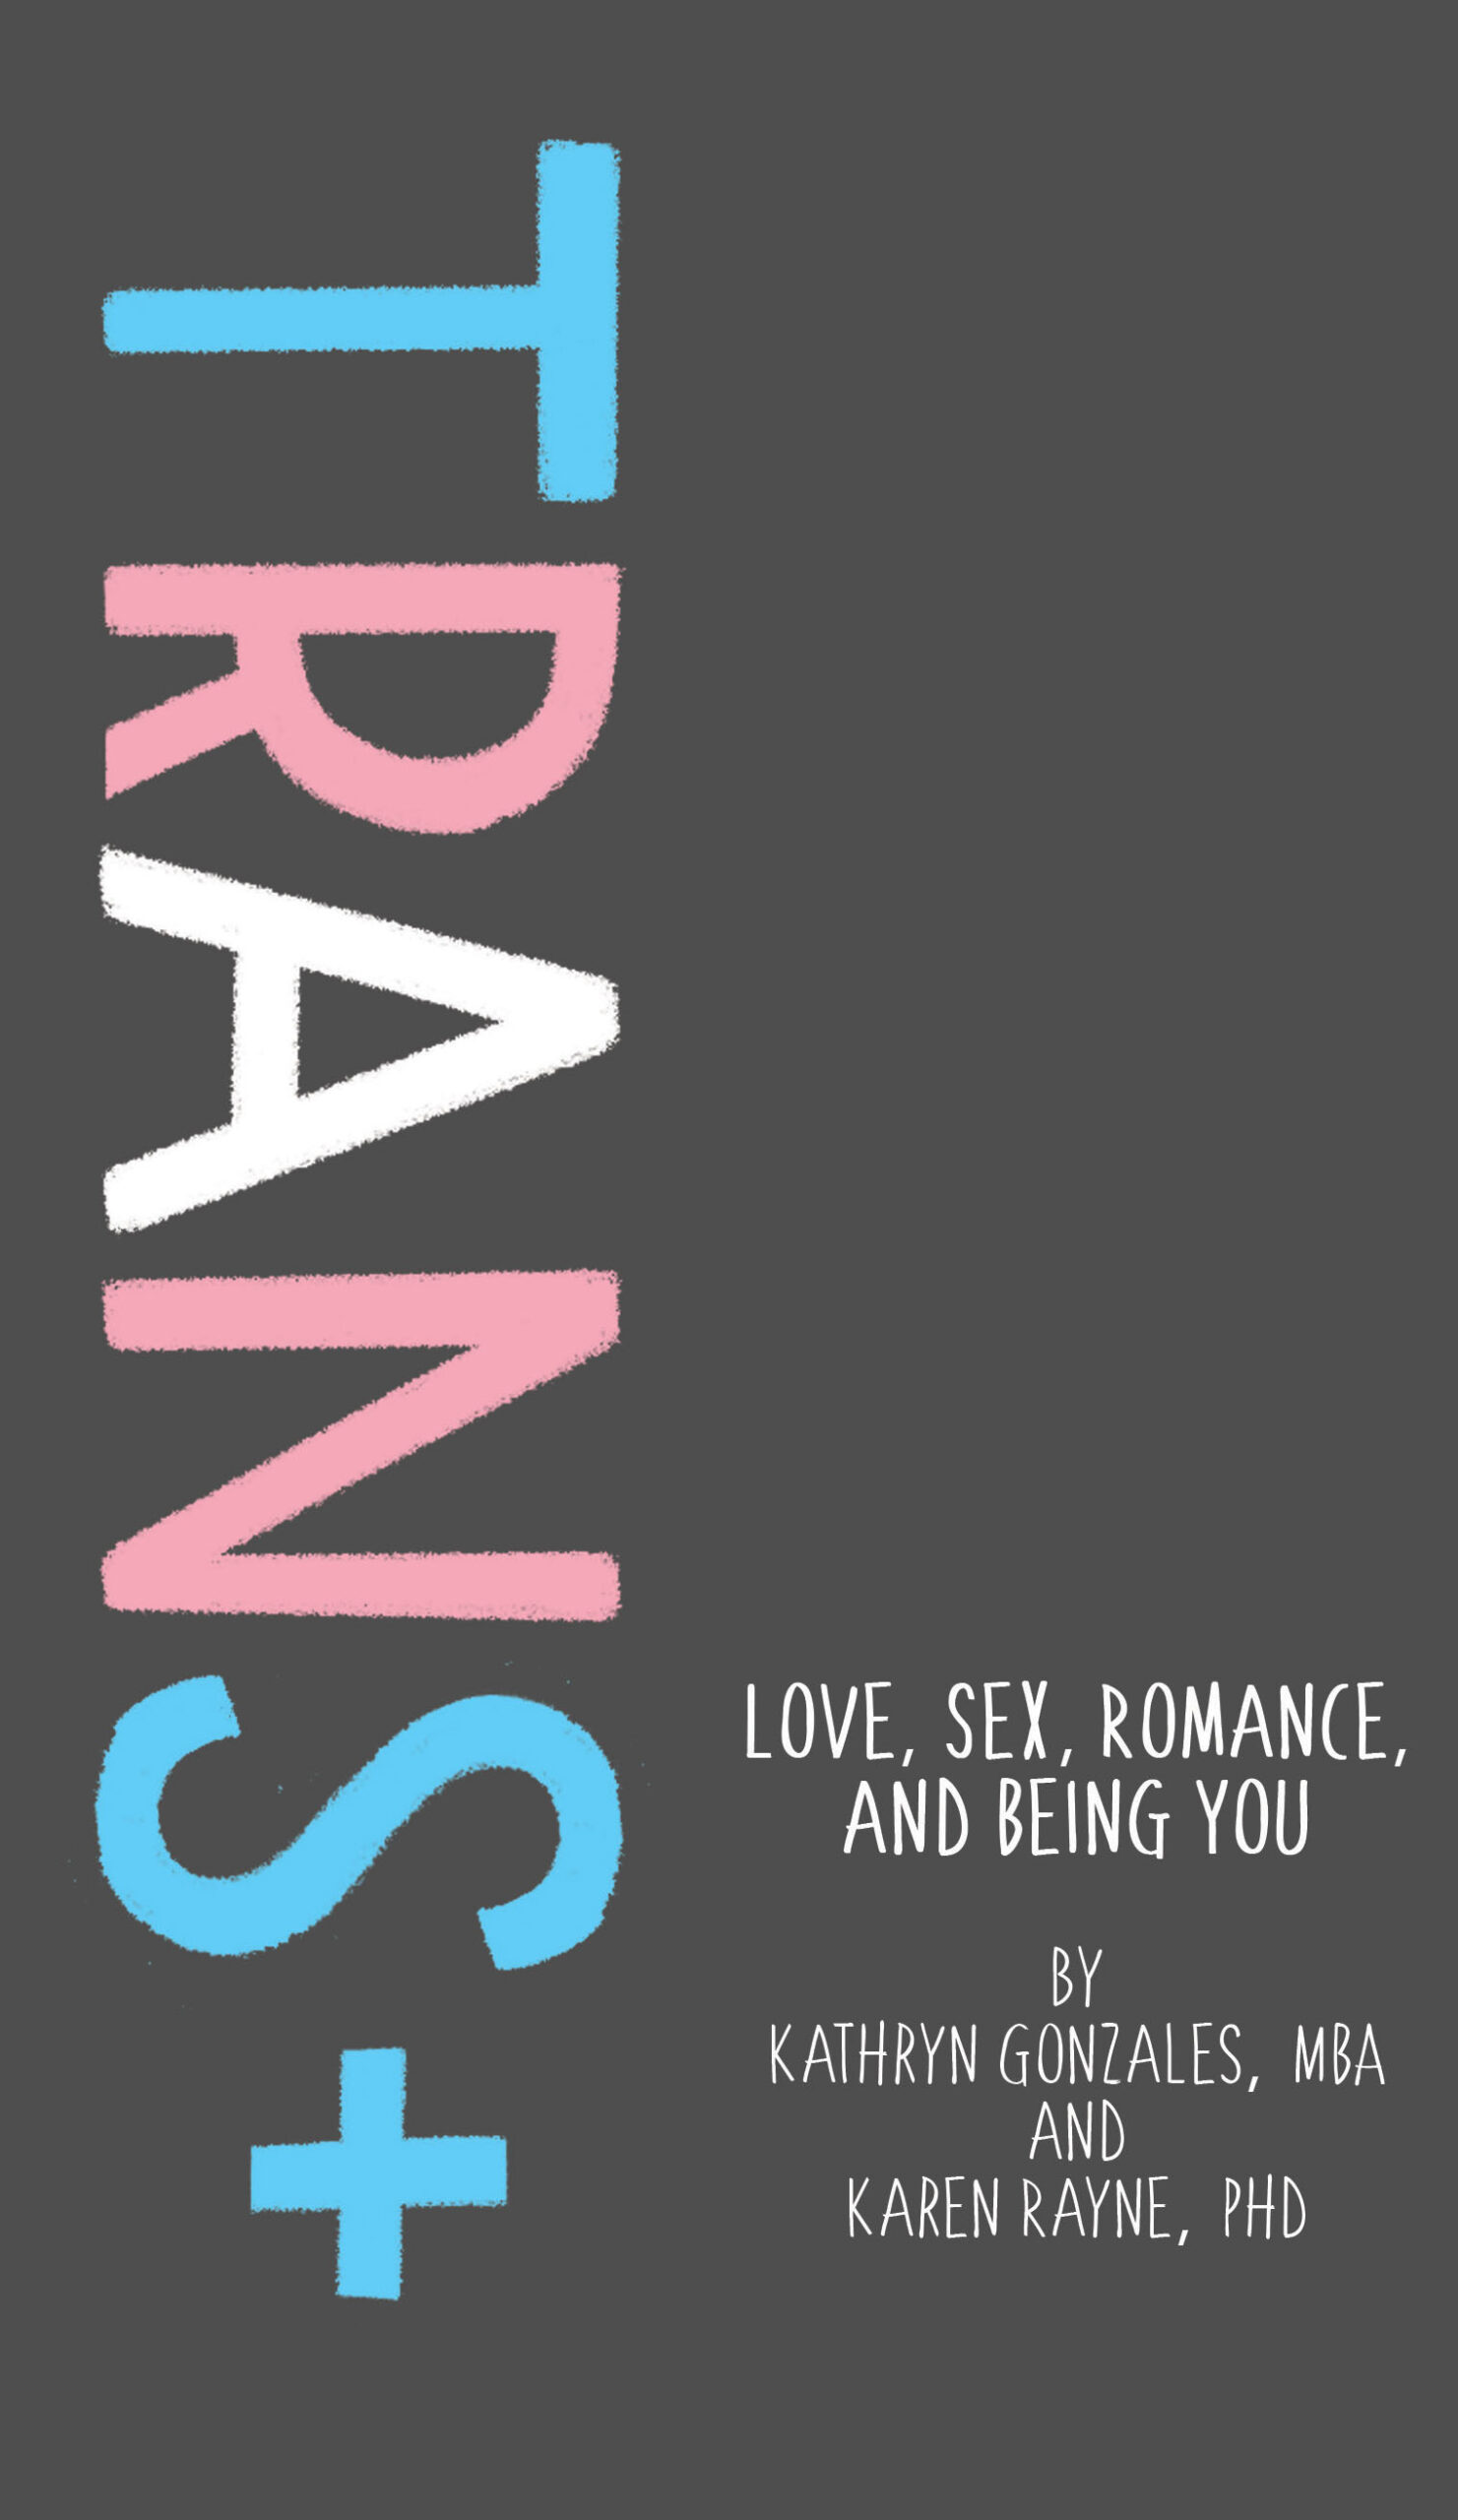 Book cover of Trans+: Love, Sex, Romance, and Being You.